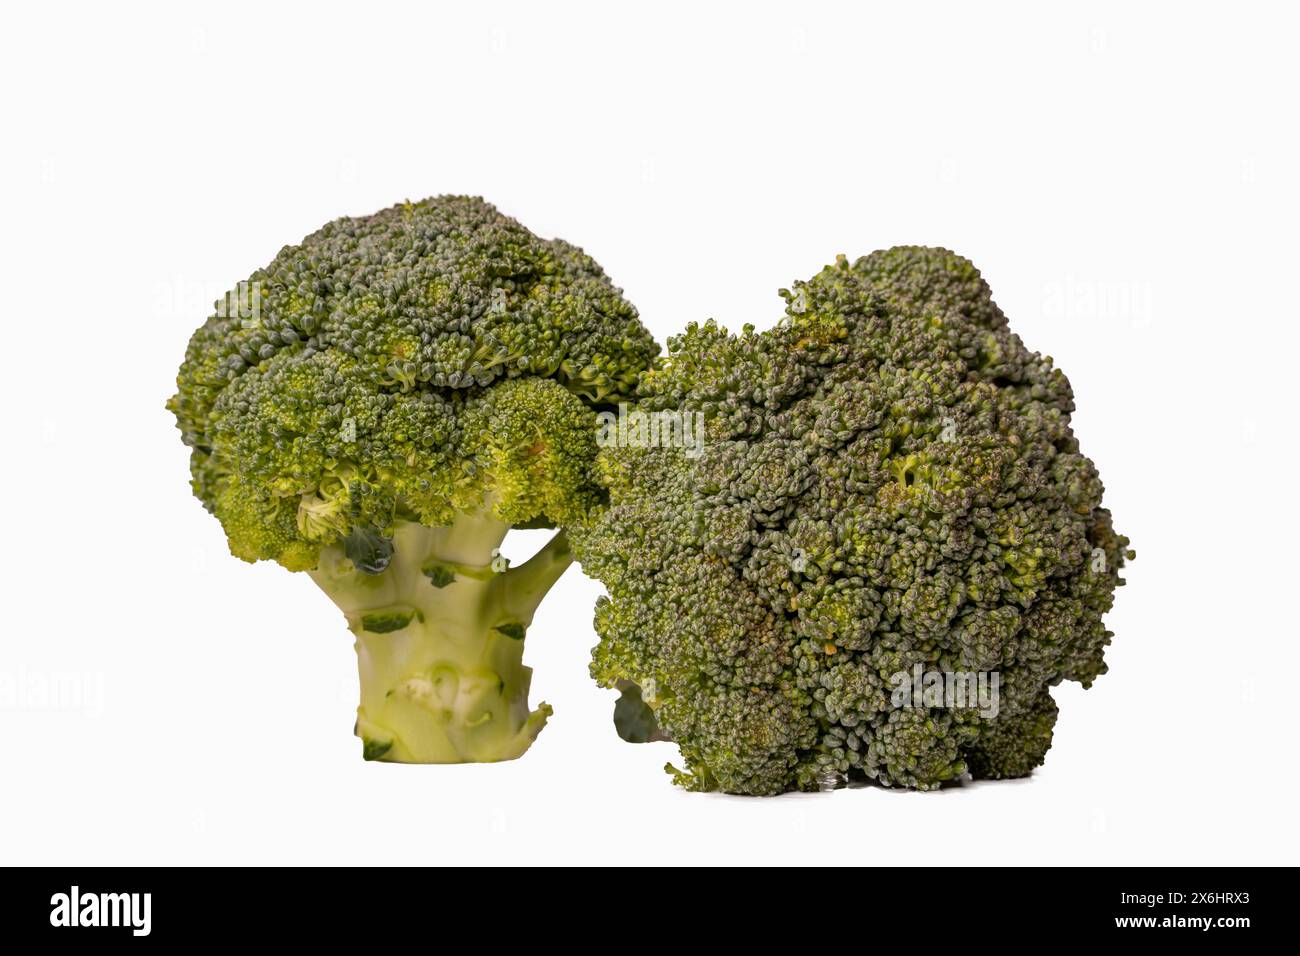 Pure Nutrient Delight: Broccolis in a Wholesome White Setting Stock Photo